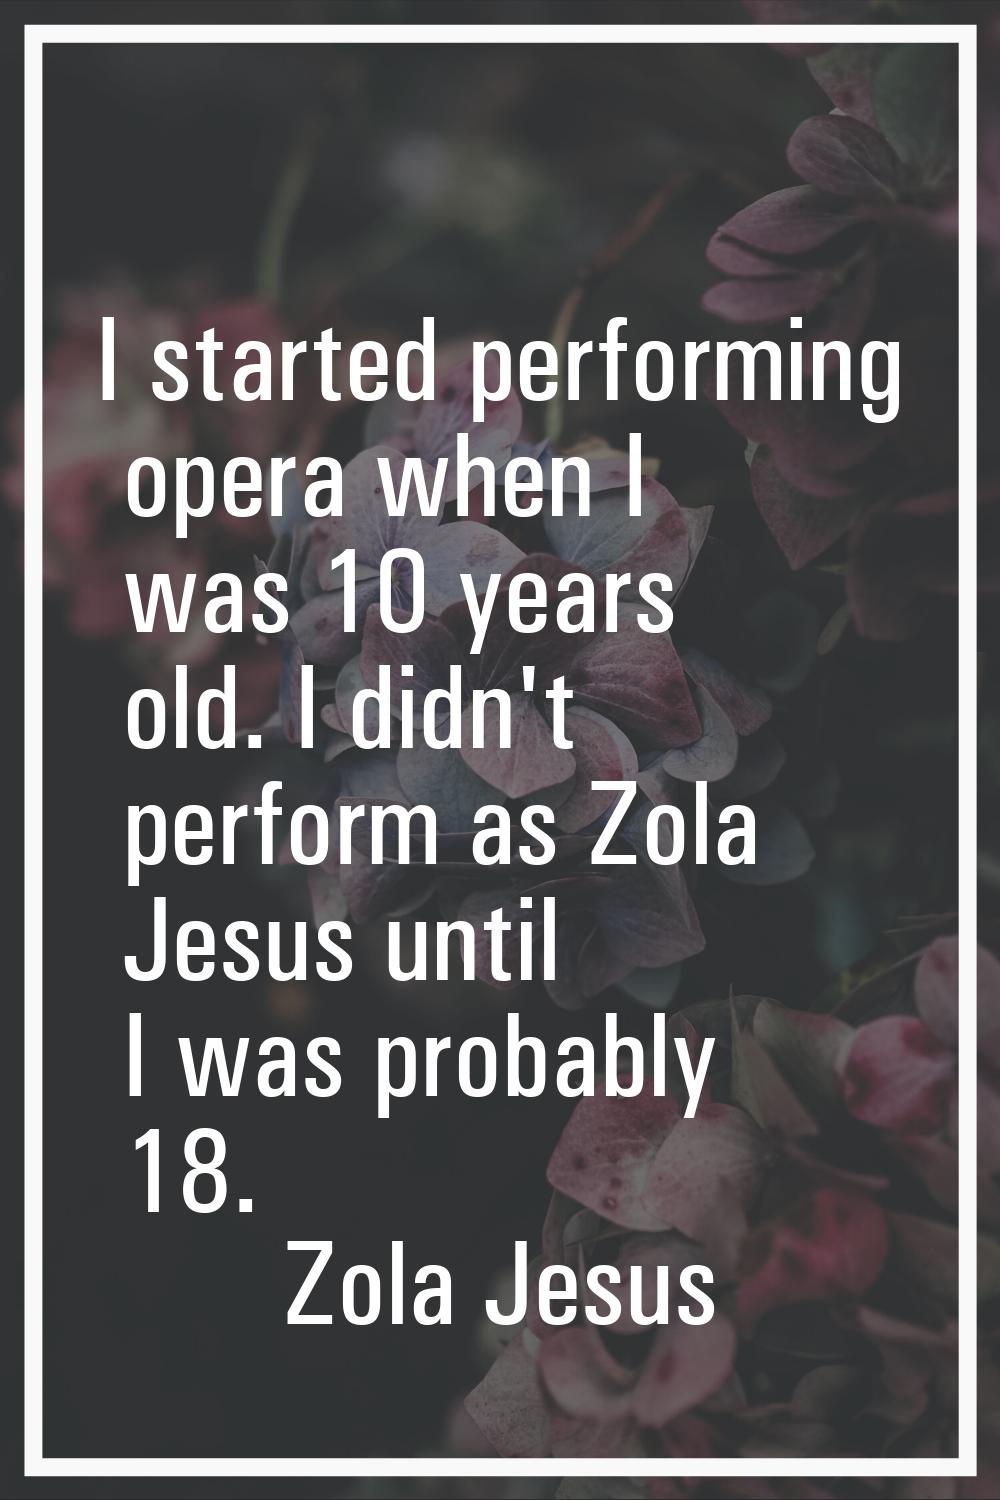 I started performing opera when I was 10 years old. I didn't perform as Zola Jesus until I was prob